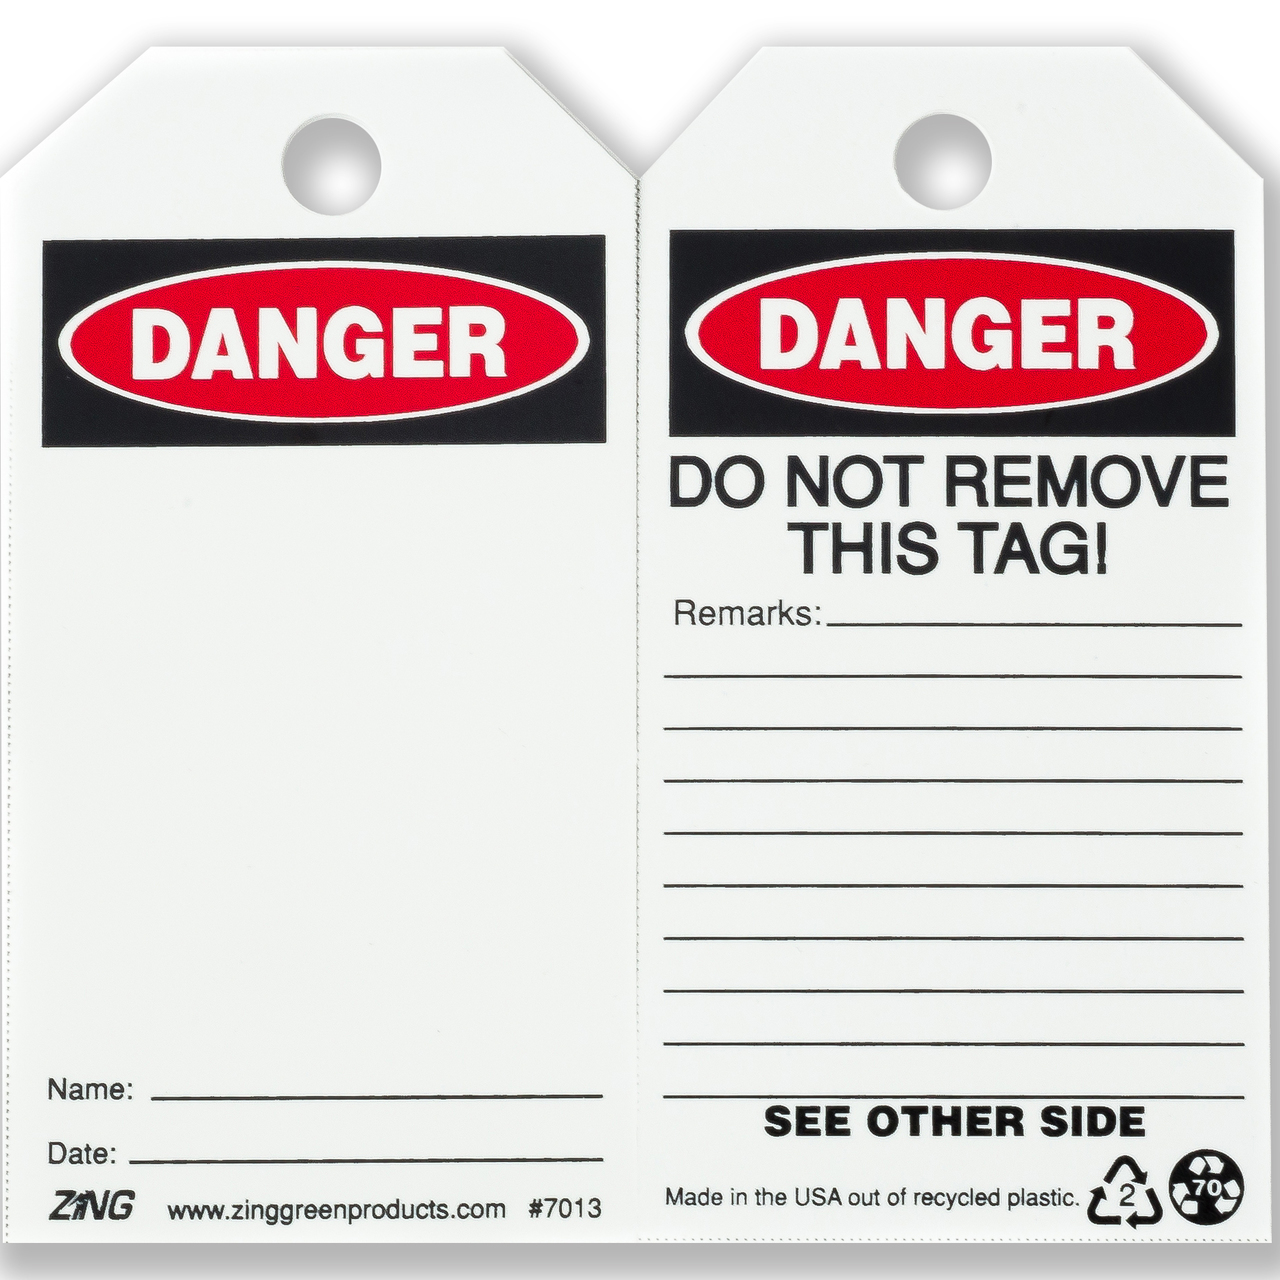 ZING Eco Safety Tag, DANGER, Blank, 5.75Hx3W, 10 Pack